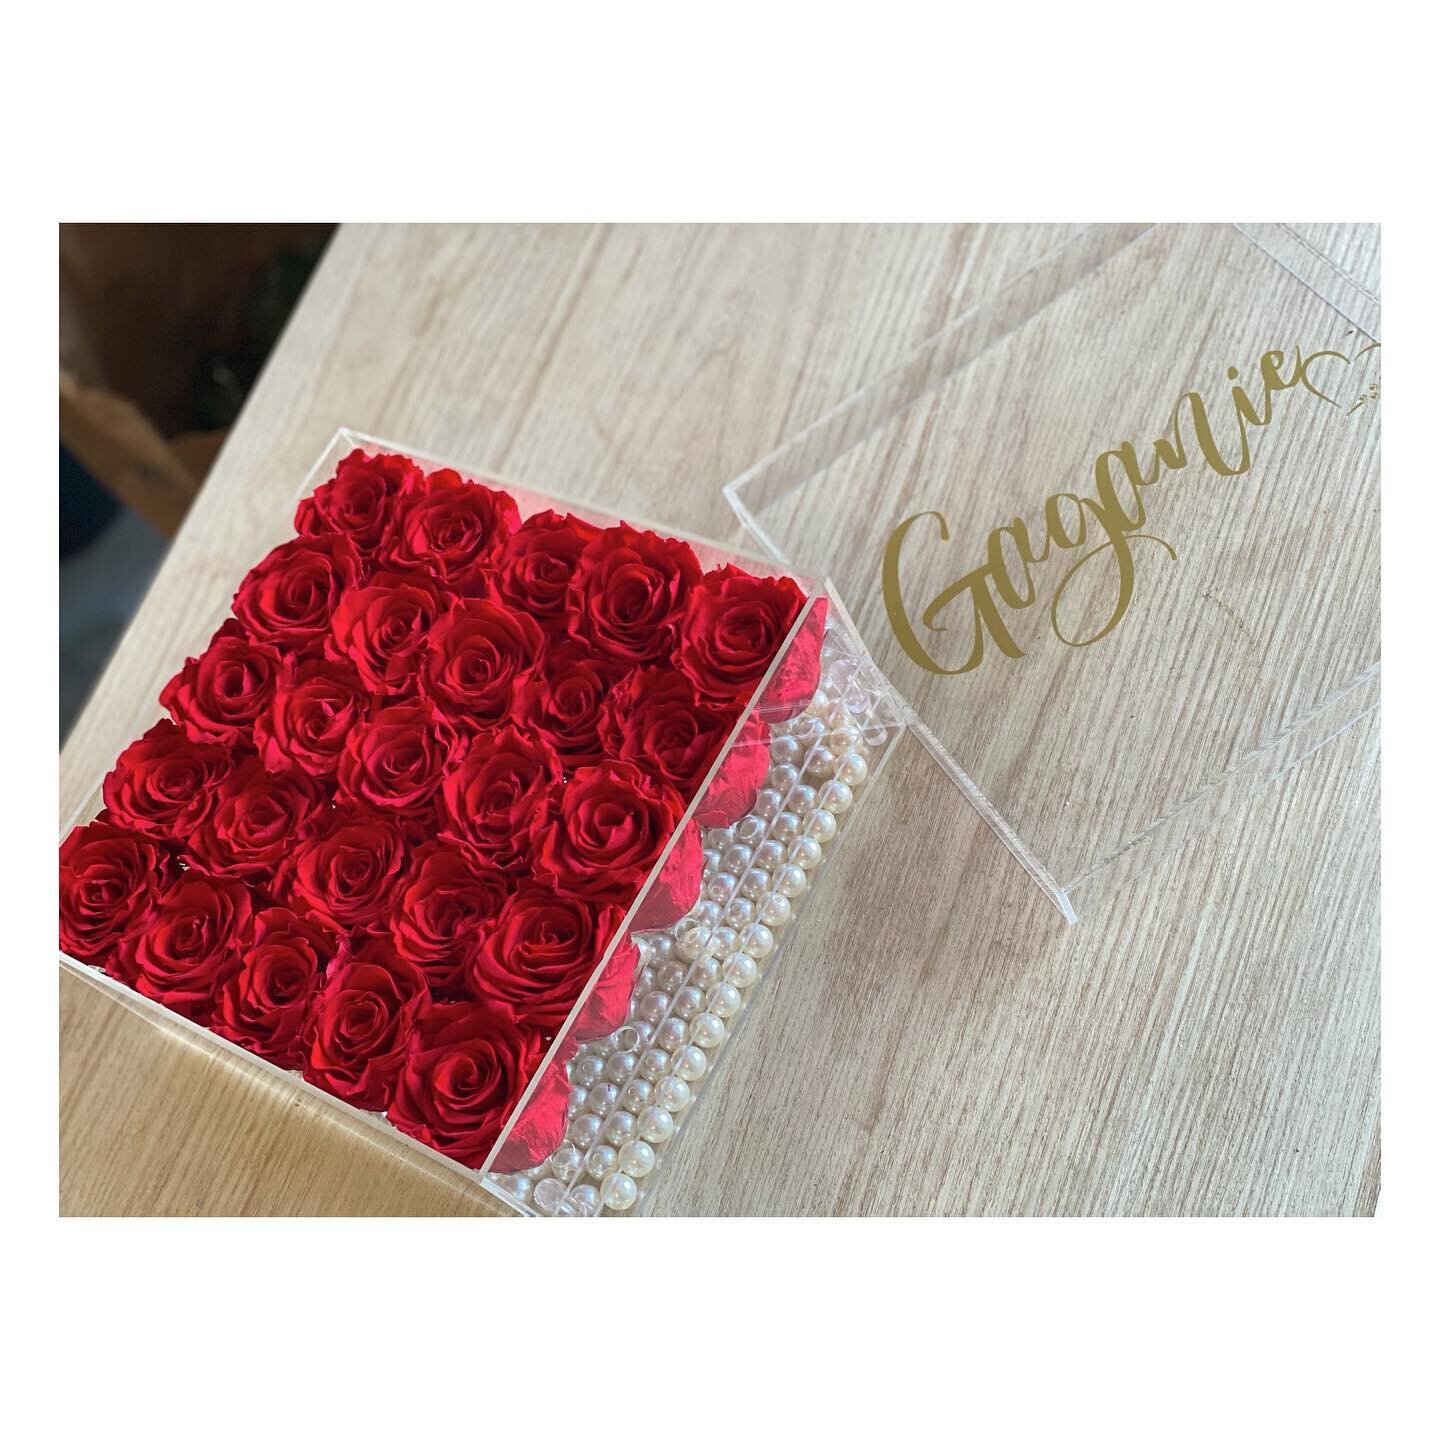 One of our favourite Eternal Rose Boxes to date &hearts;️🐾 25 Beautiful Red Roses, designed to Last 1 to 3 Years &amp; More 🧿
.
S h o p 🌹 O n l i n e . at www.pinkpetals.ca
.
For all of your wedding or event floral needs, please contact Pink Petal